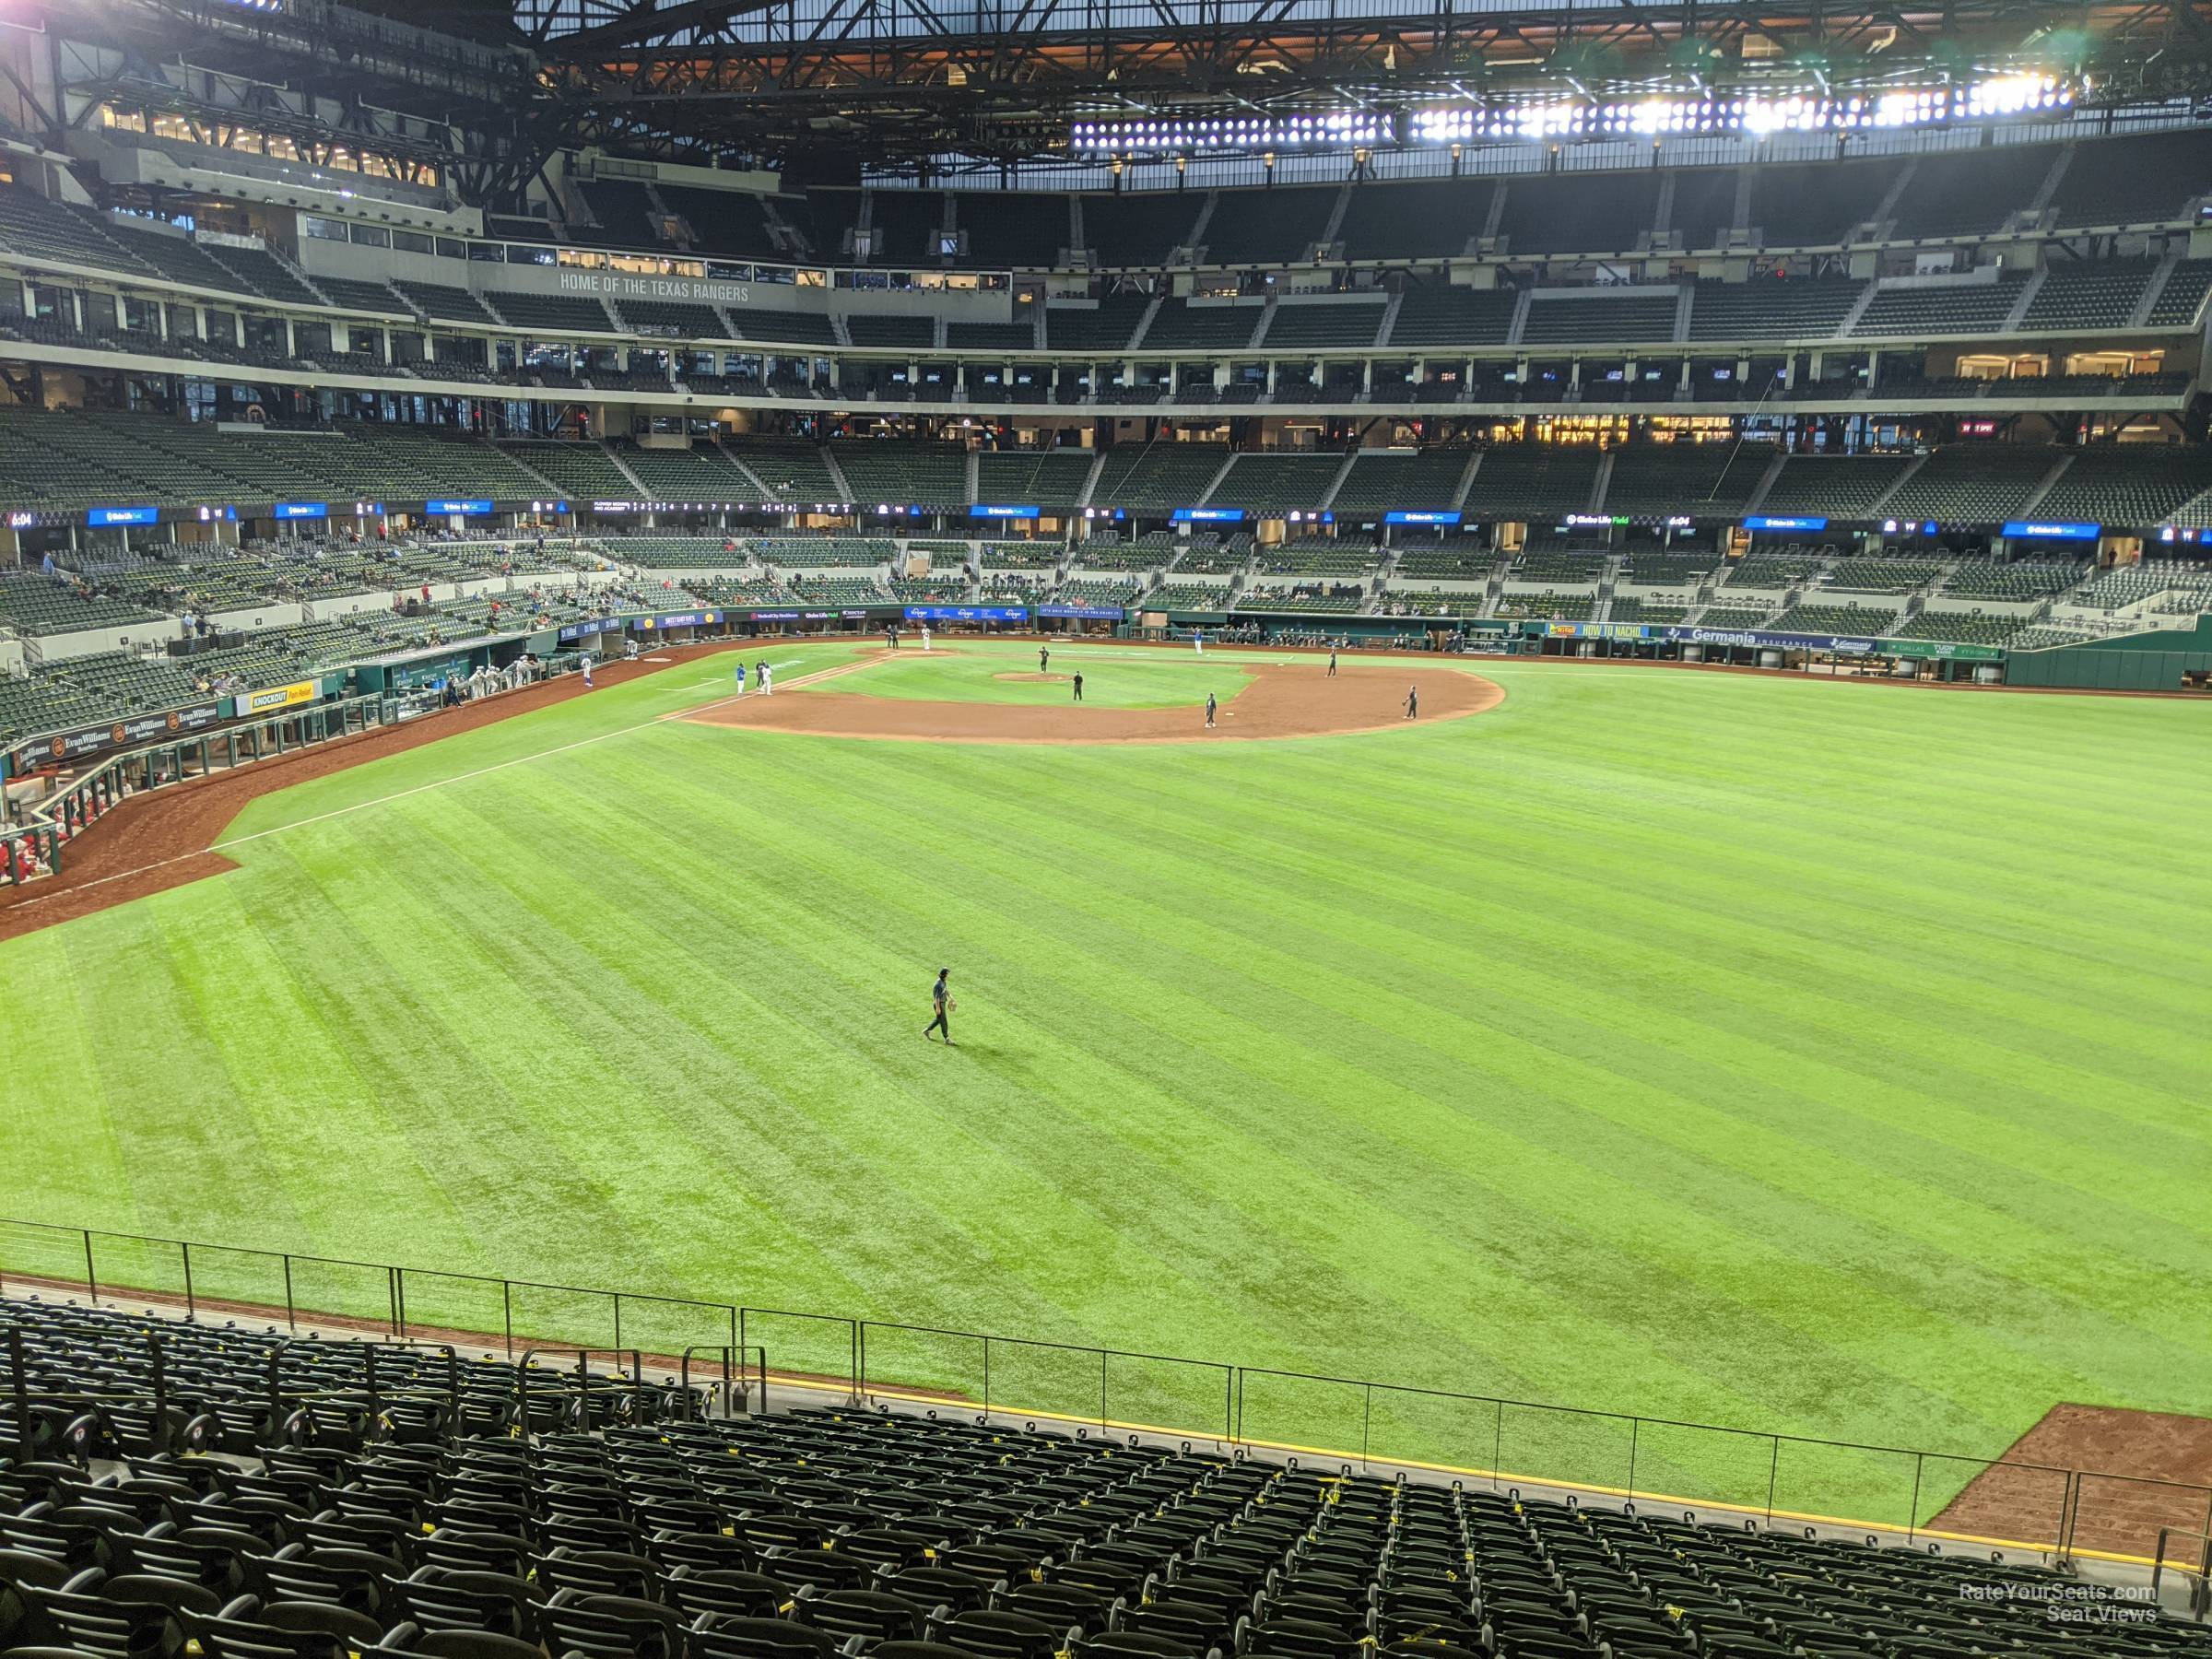 Section 131 at Globe Life Field